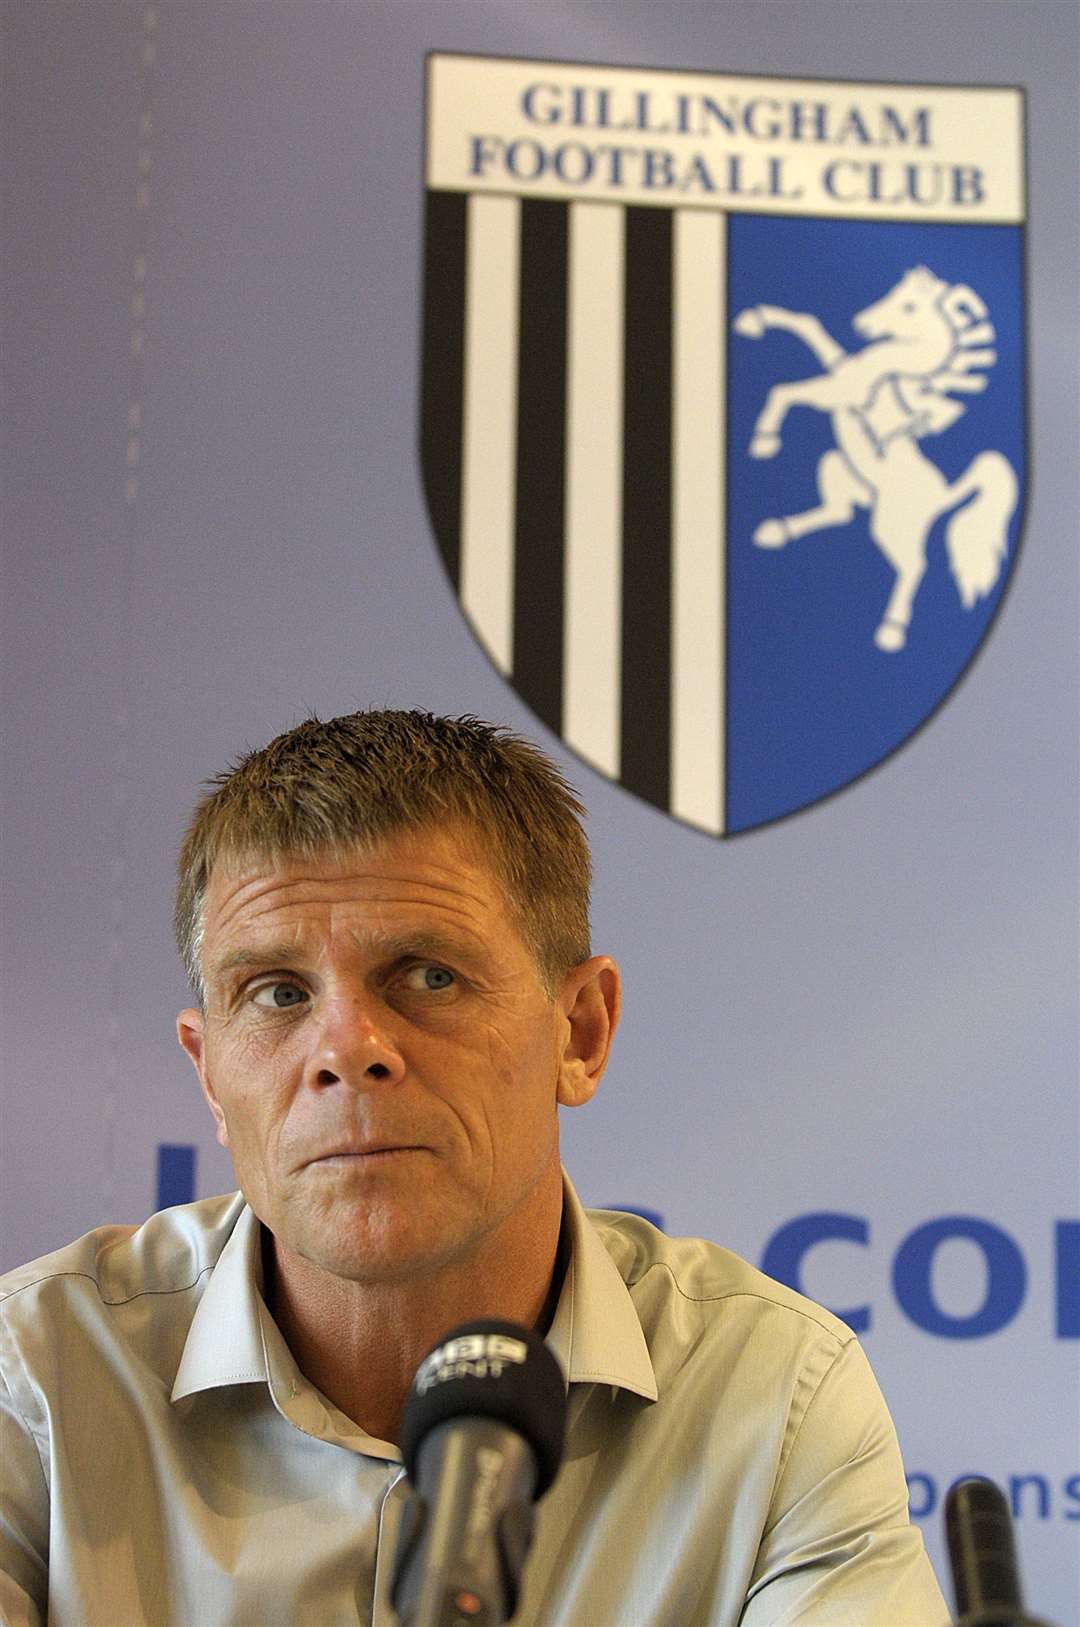 Former player and manager Andy Hessenthaler is Jim's personal favourite